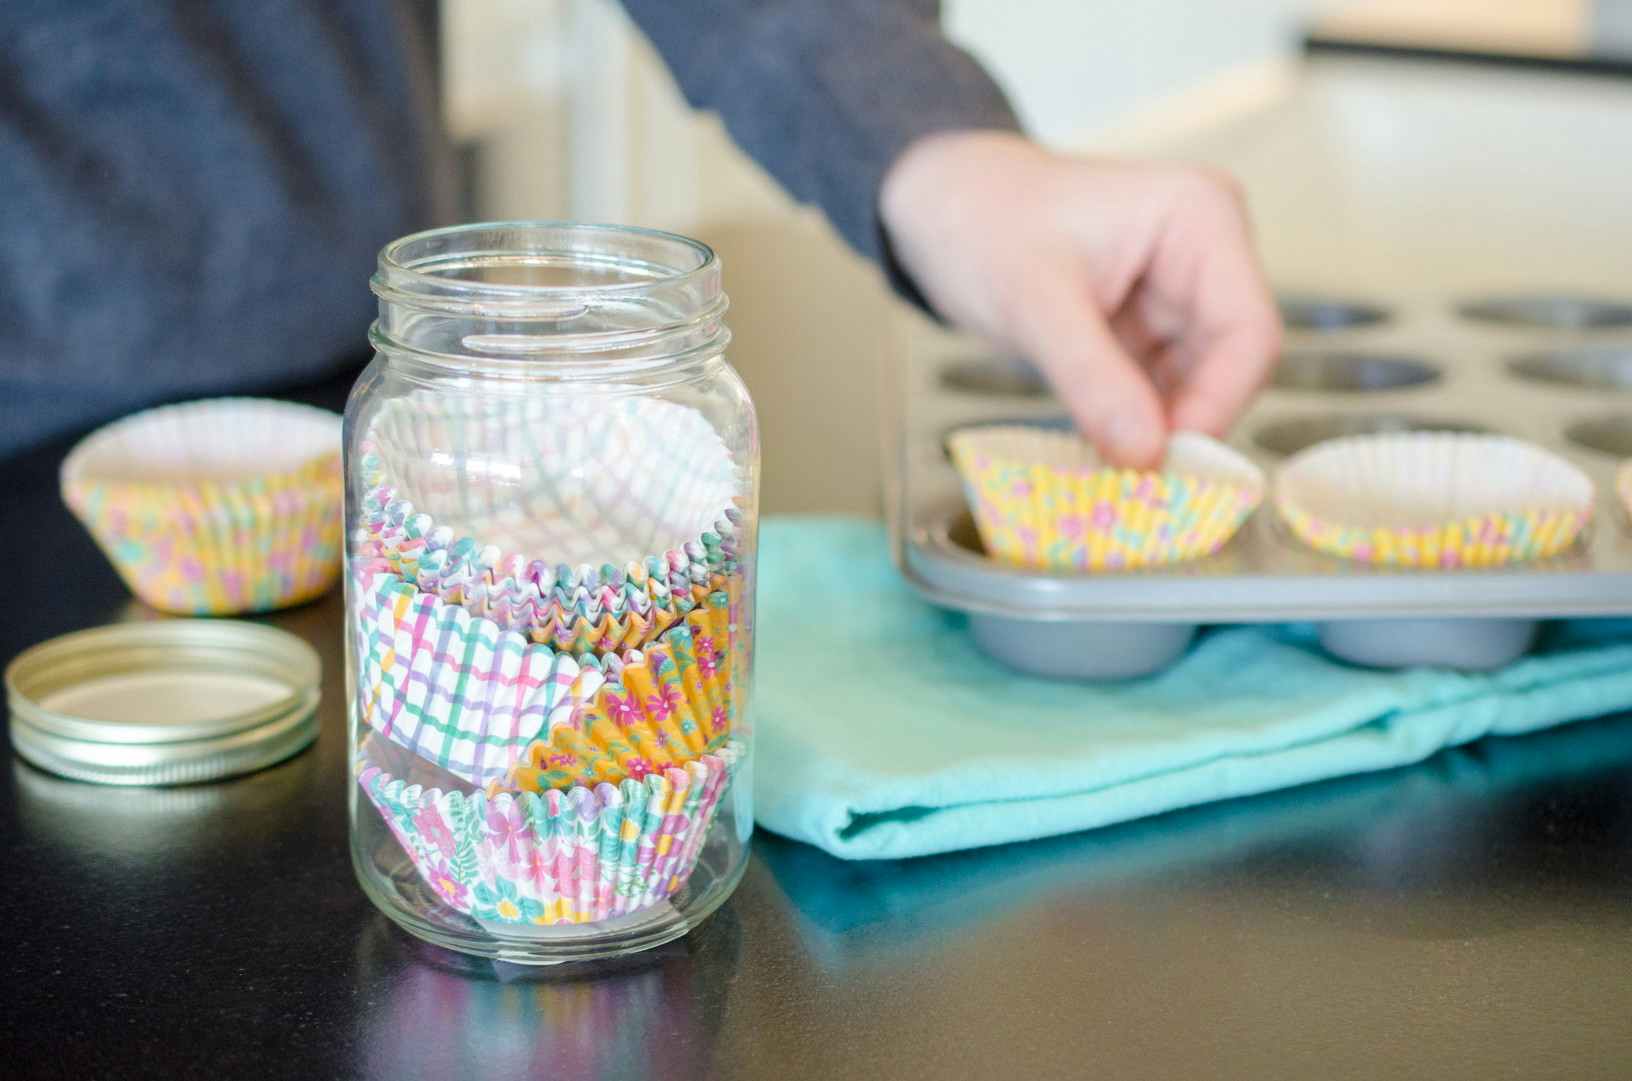 A person prevent muffin cups from getting crushed by storing them in a canning jar